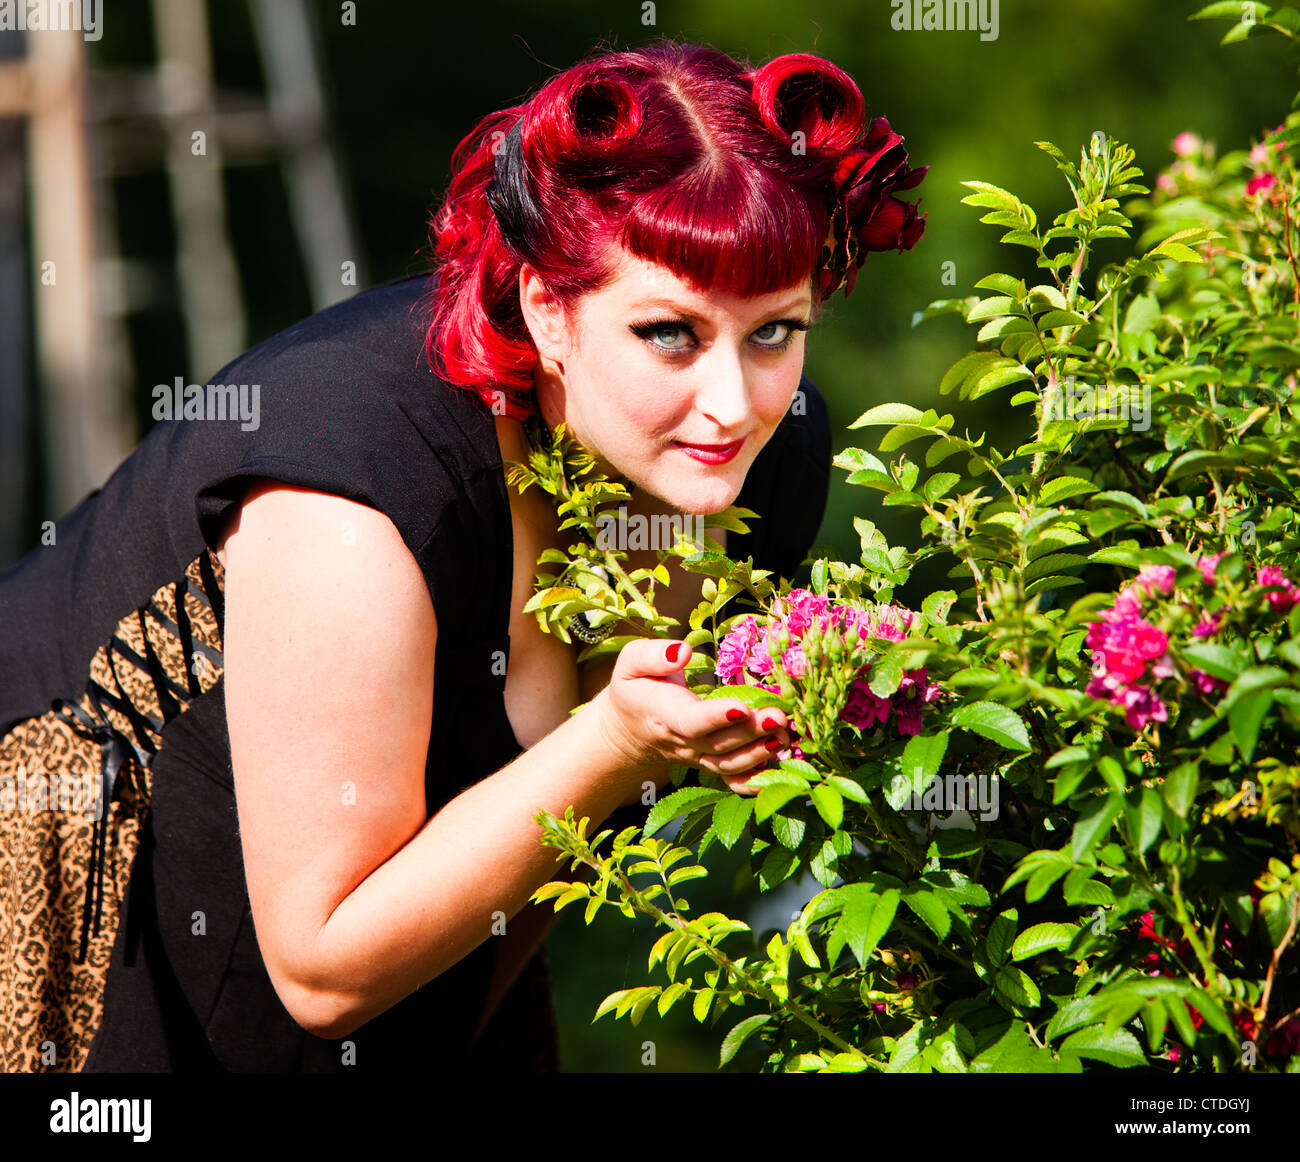 1950's style pinup model posing as a housewife smelling flowers Stock Photo  - Alamy